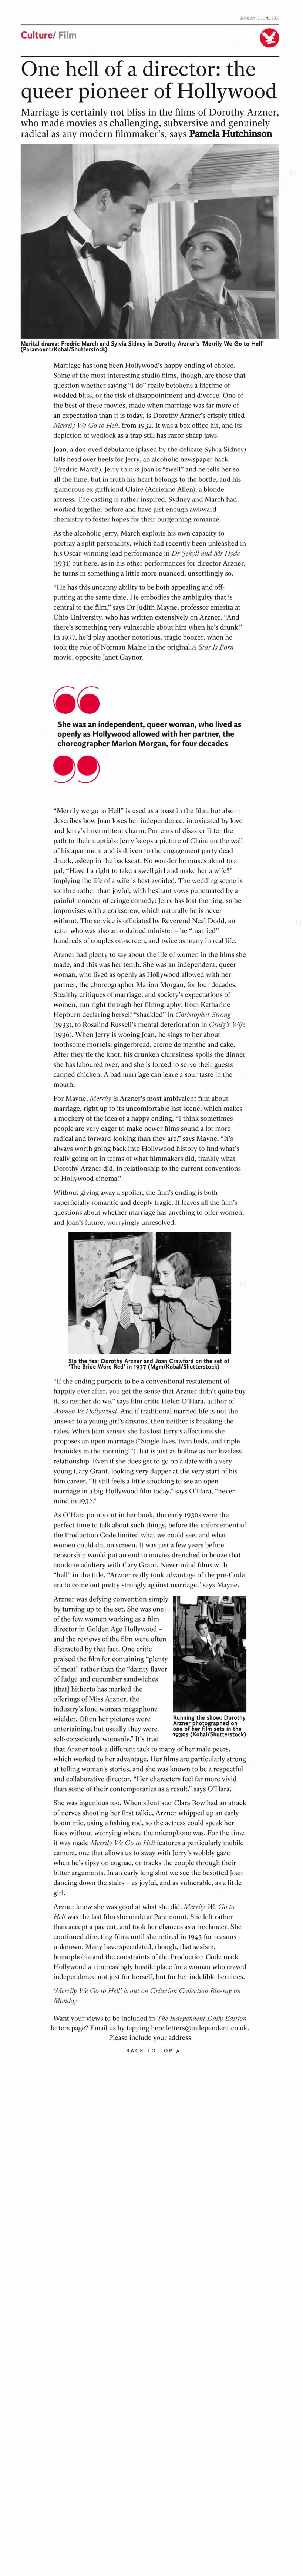 Article about Dorothy Arzner, pioneering film director